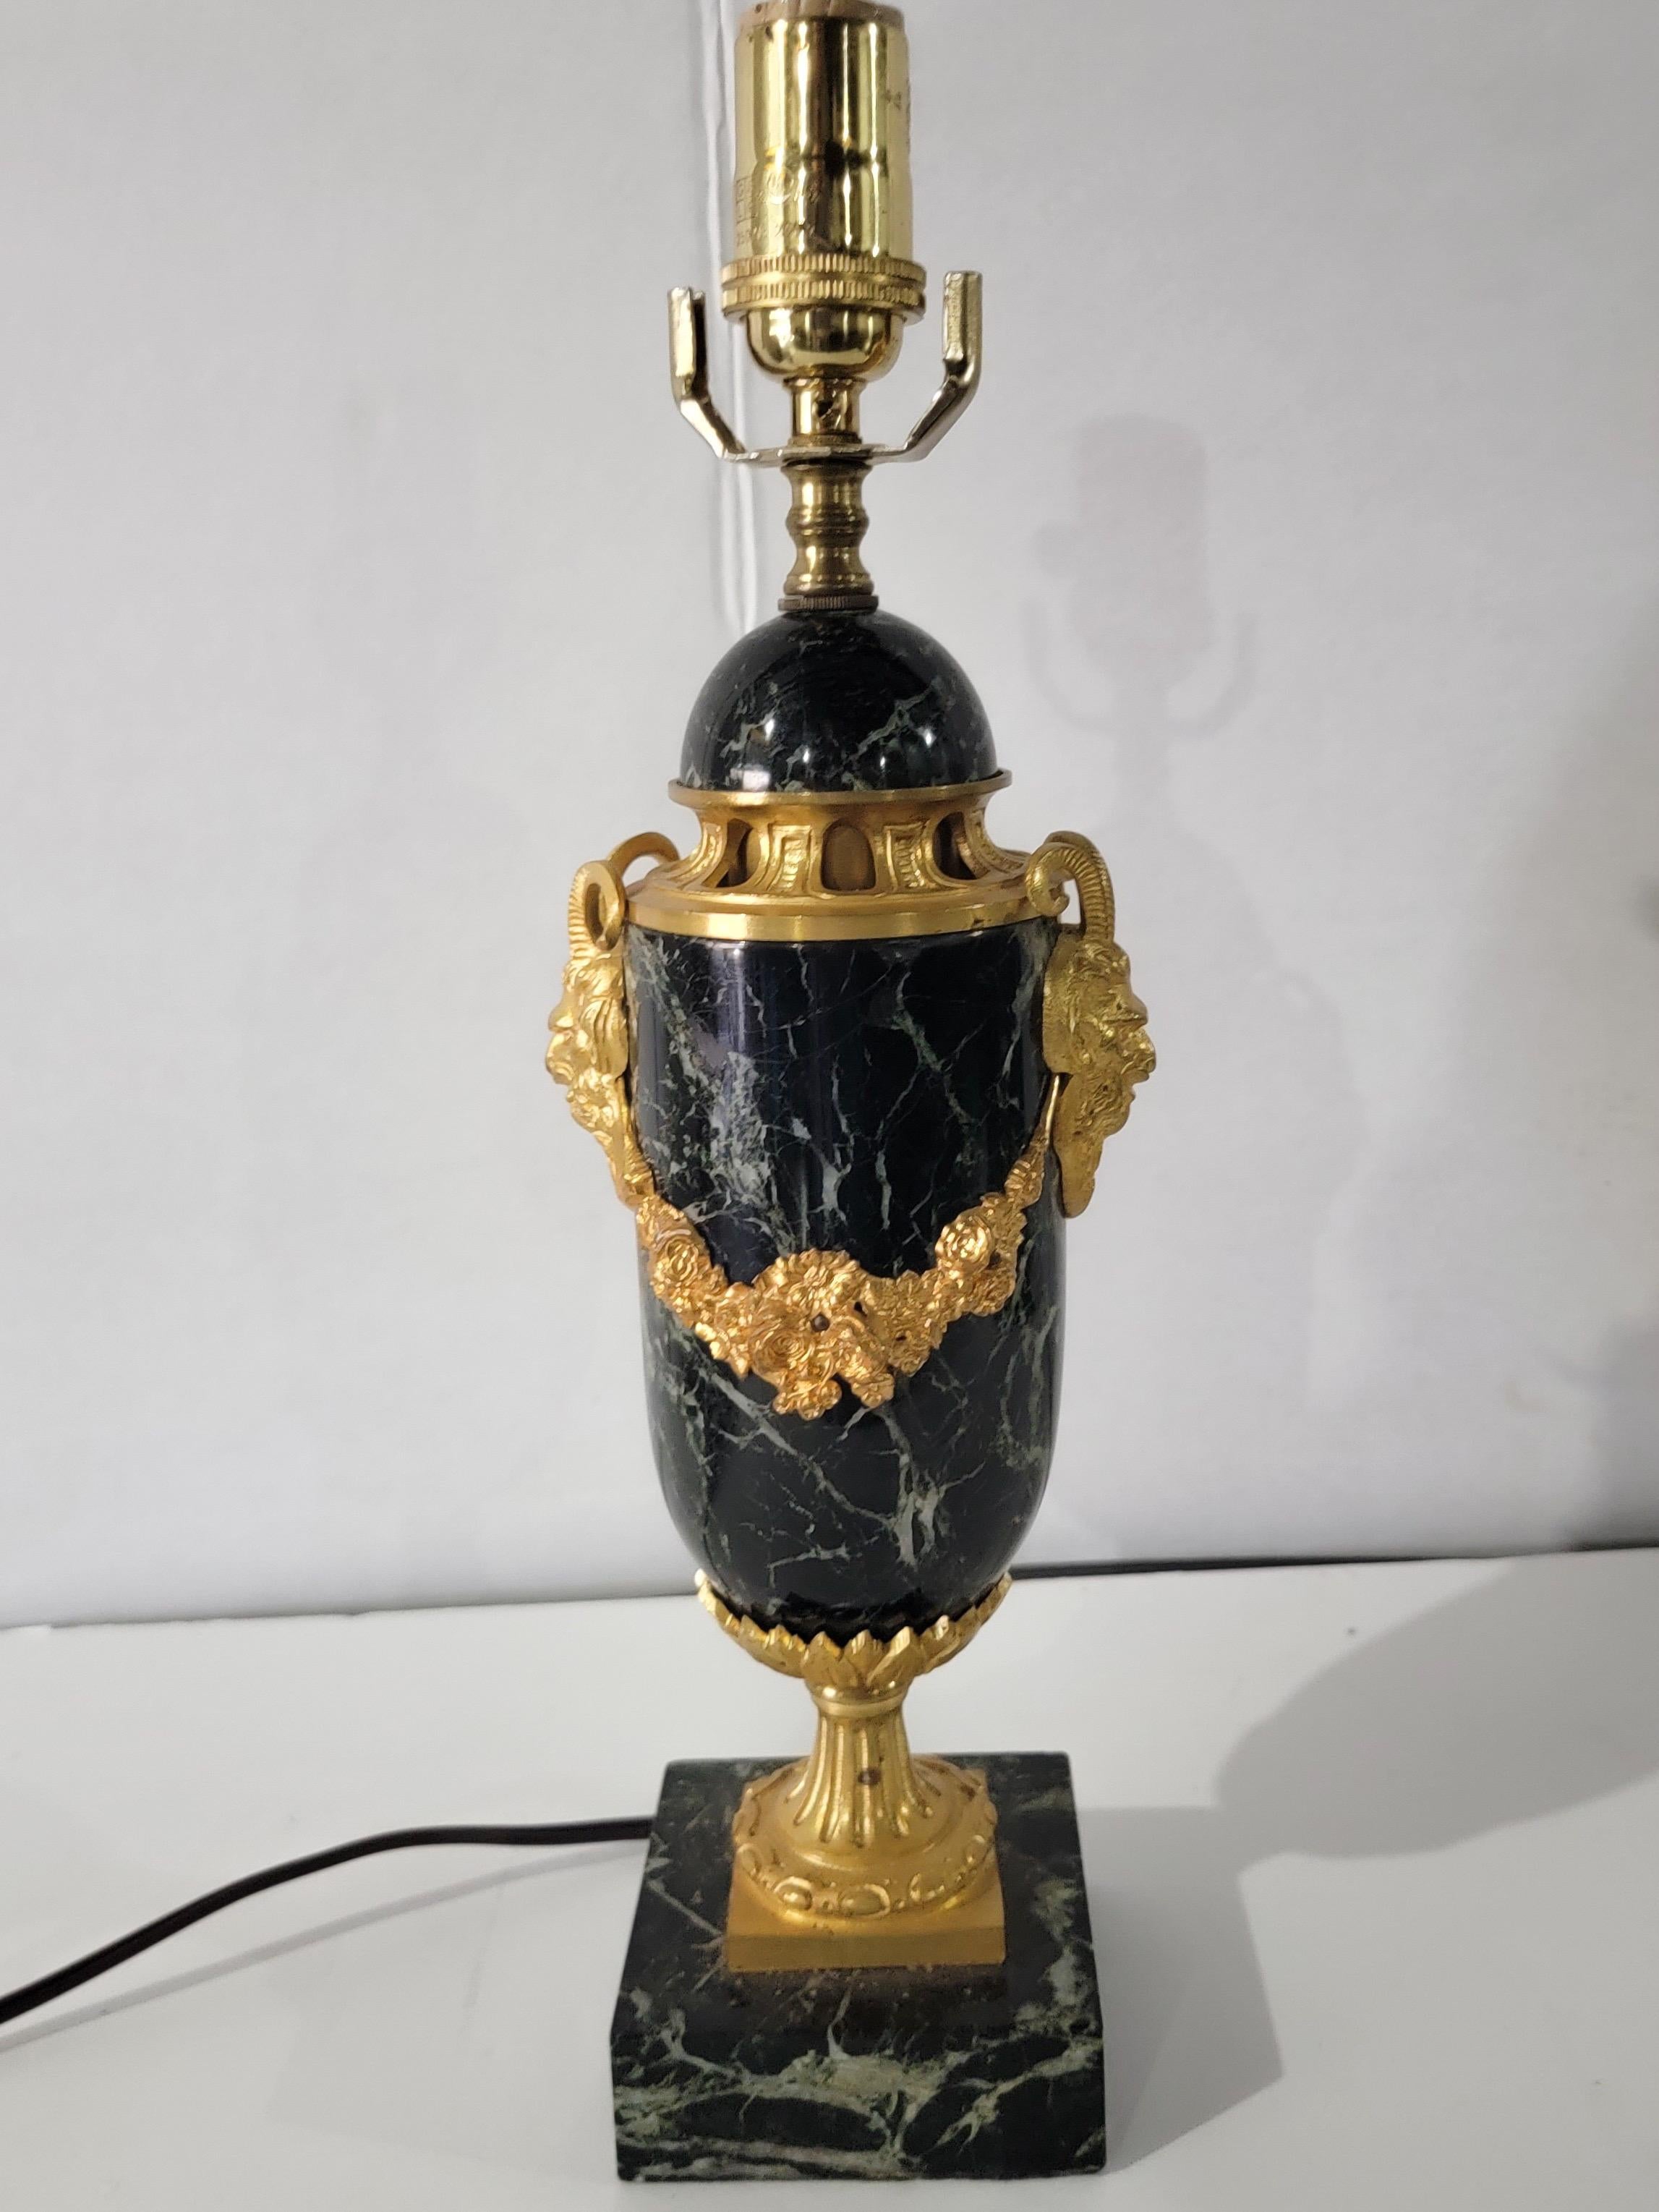 This is a lovely antique French neo-classical style gilt bronze and black veined marble lamp. It has a urn form with draped gilt bronze floral foliate. It is unmarked and in working order.
 